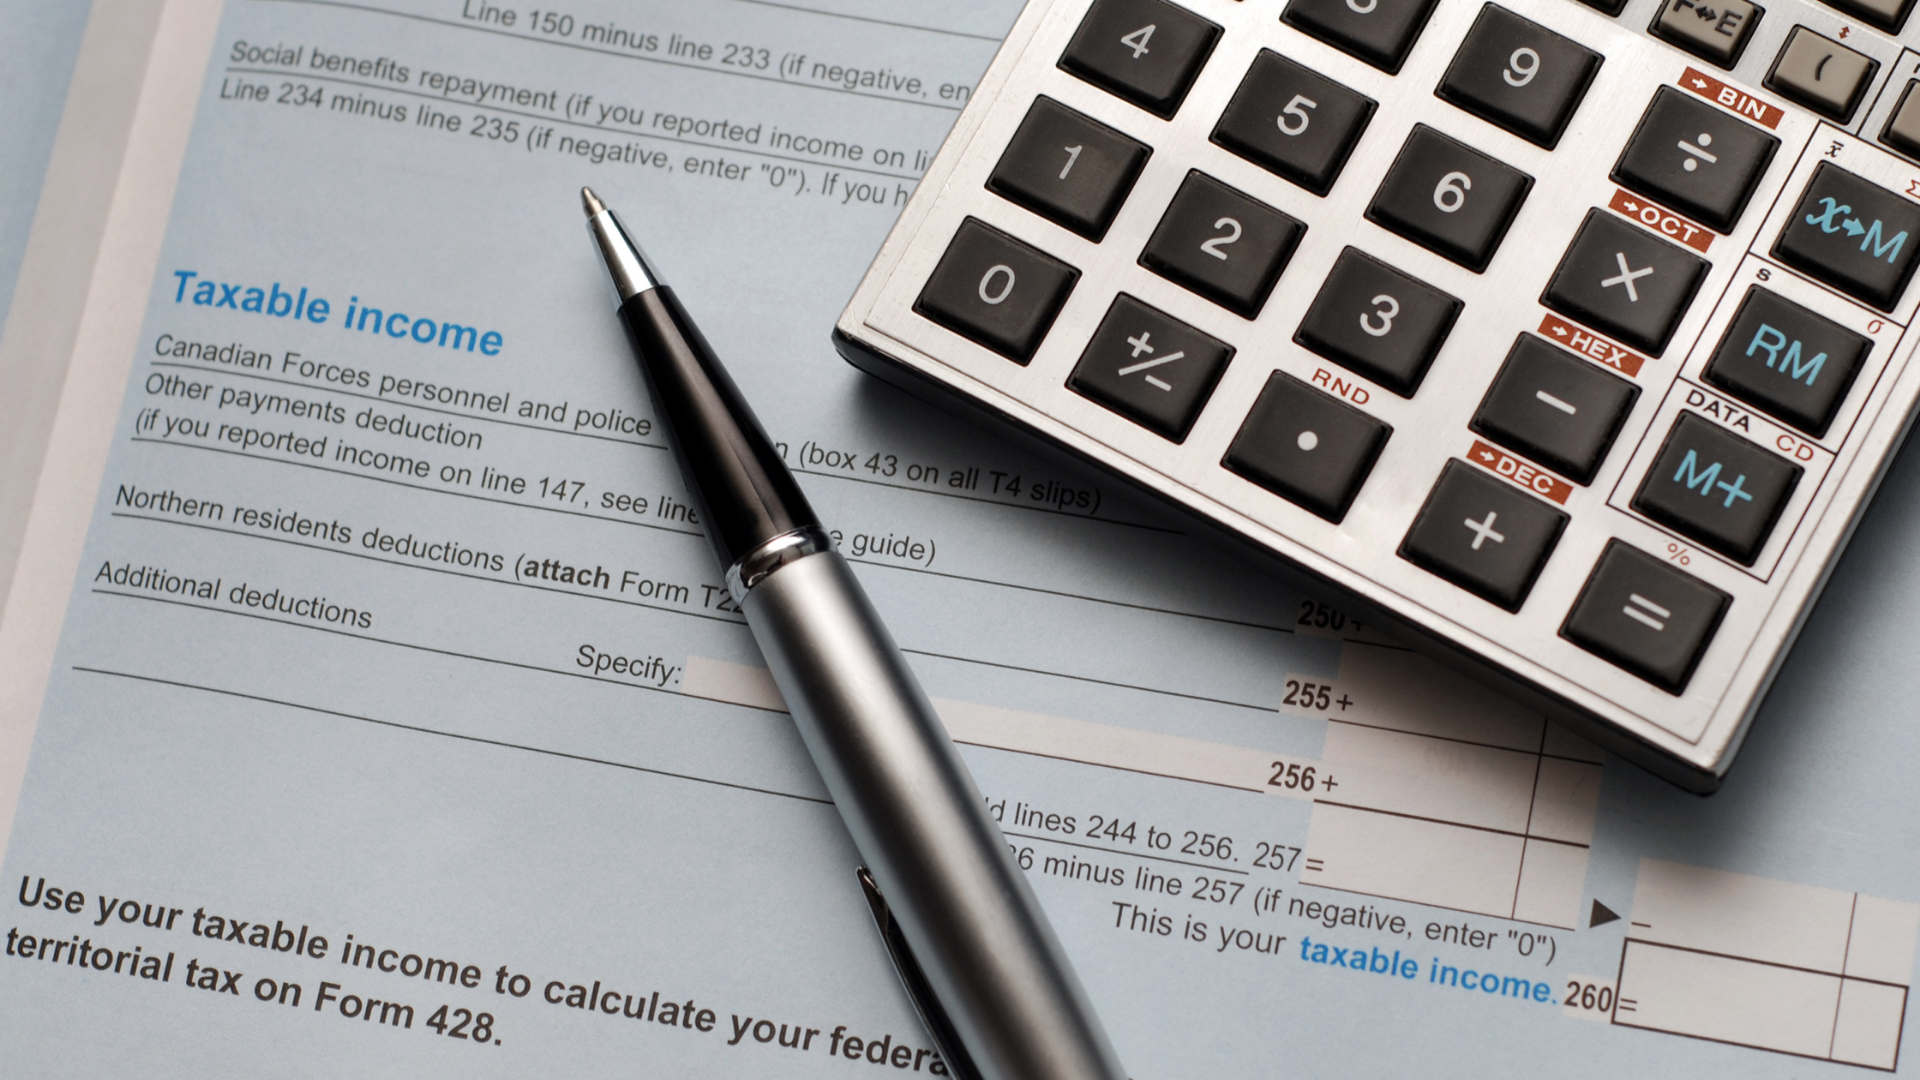 An image of a calculator and a pen on top of a small business owners tax form.